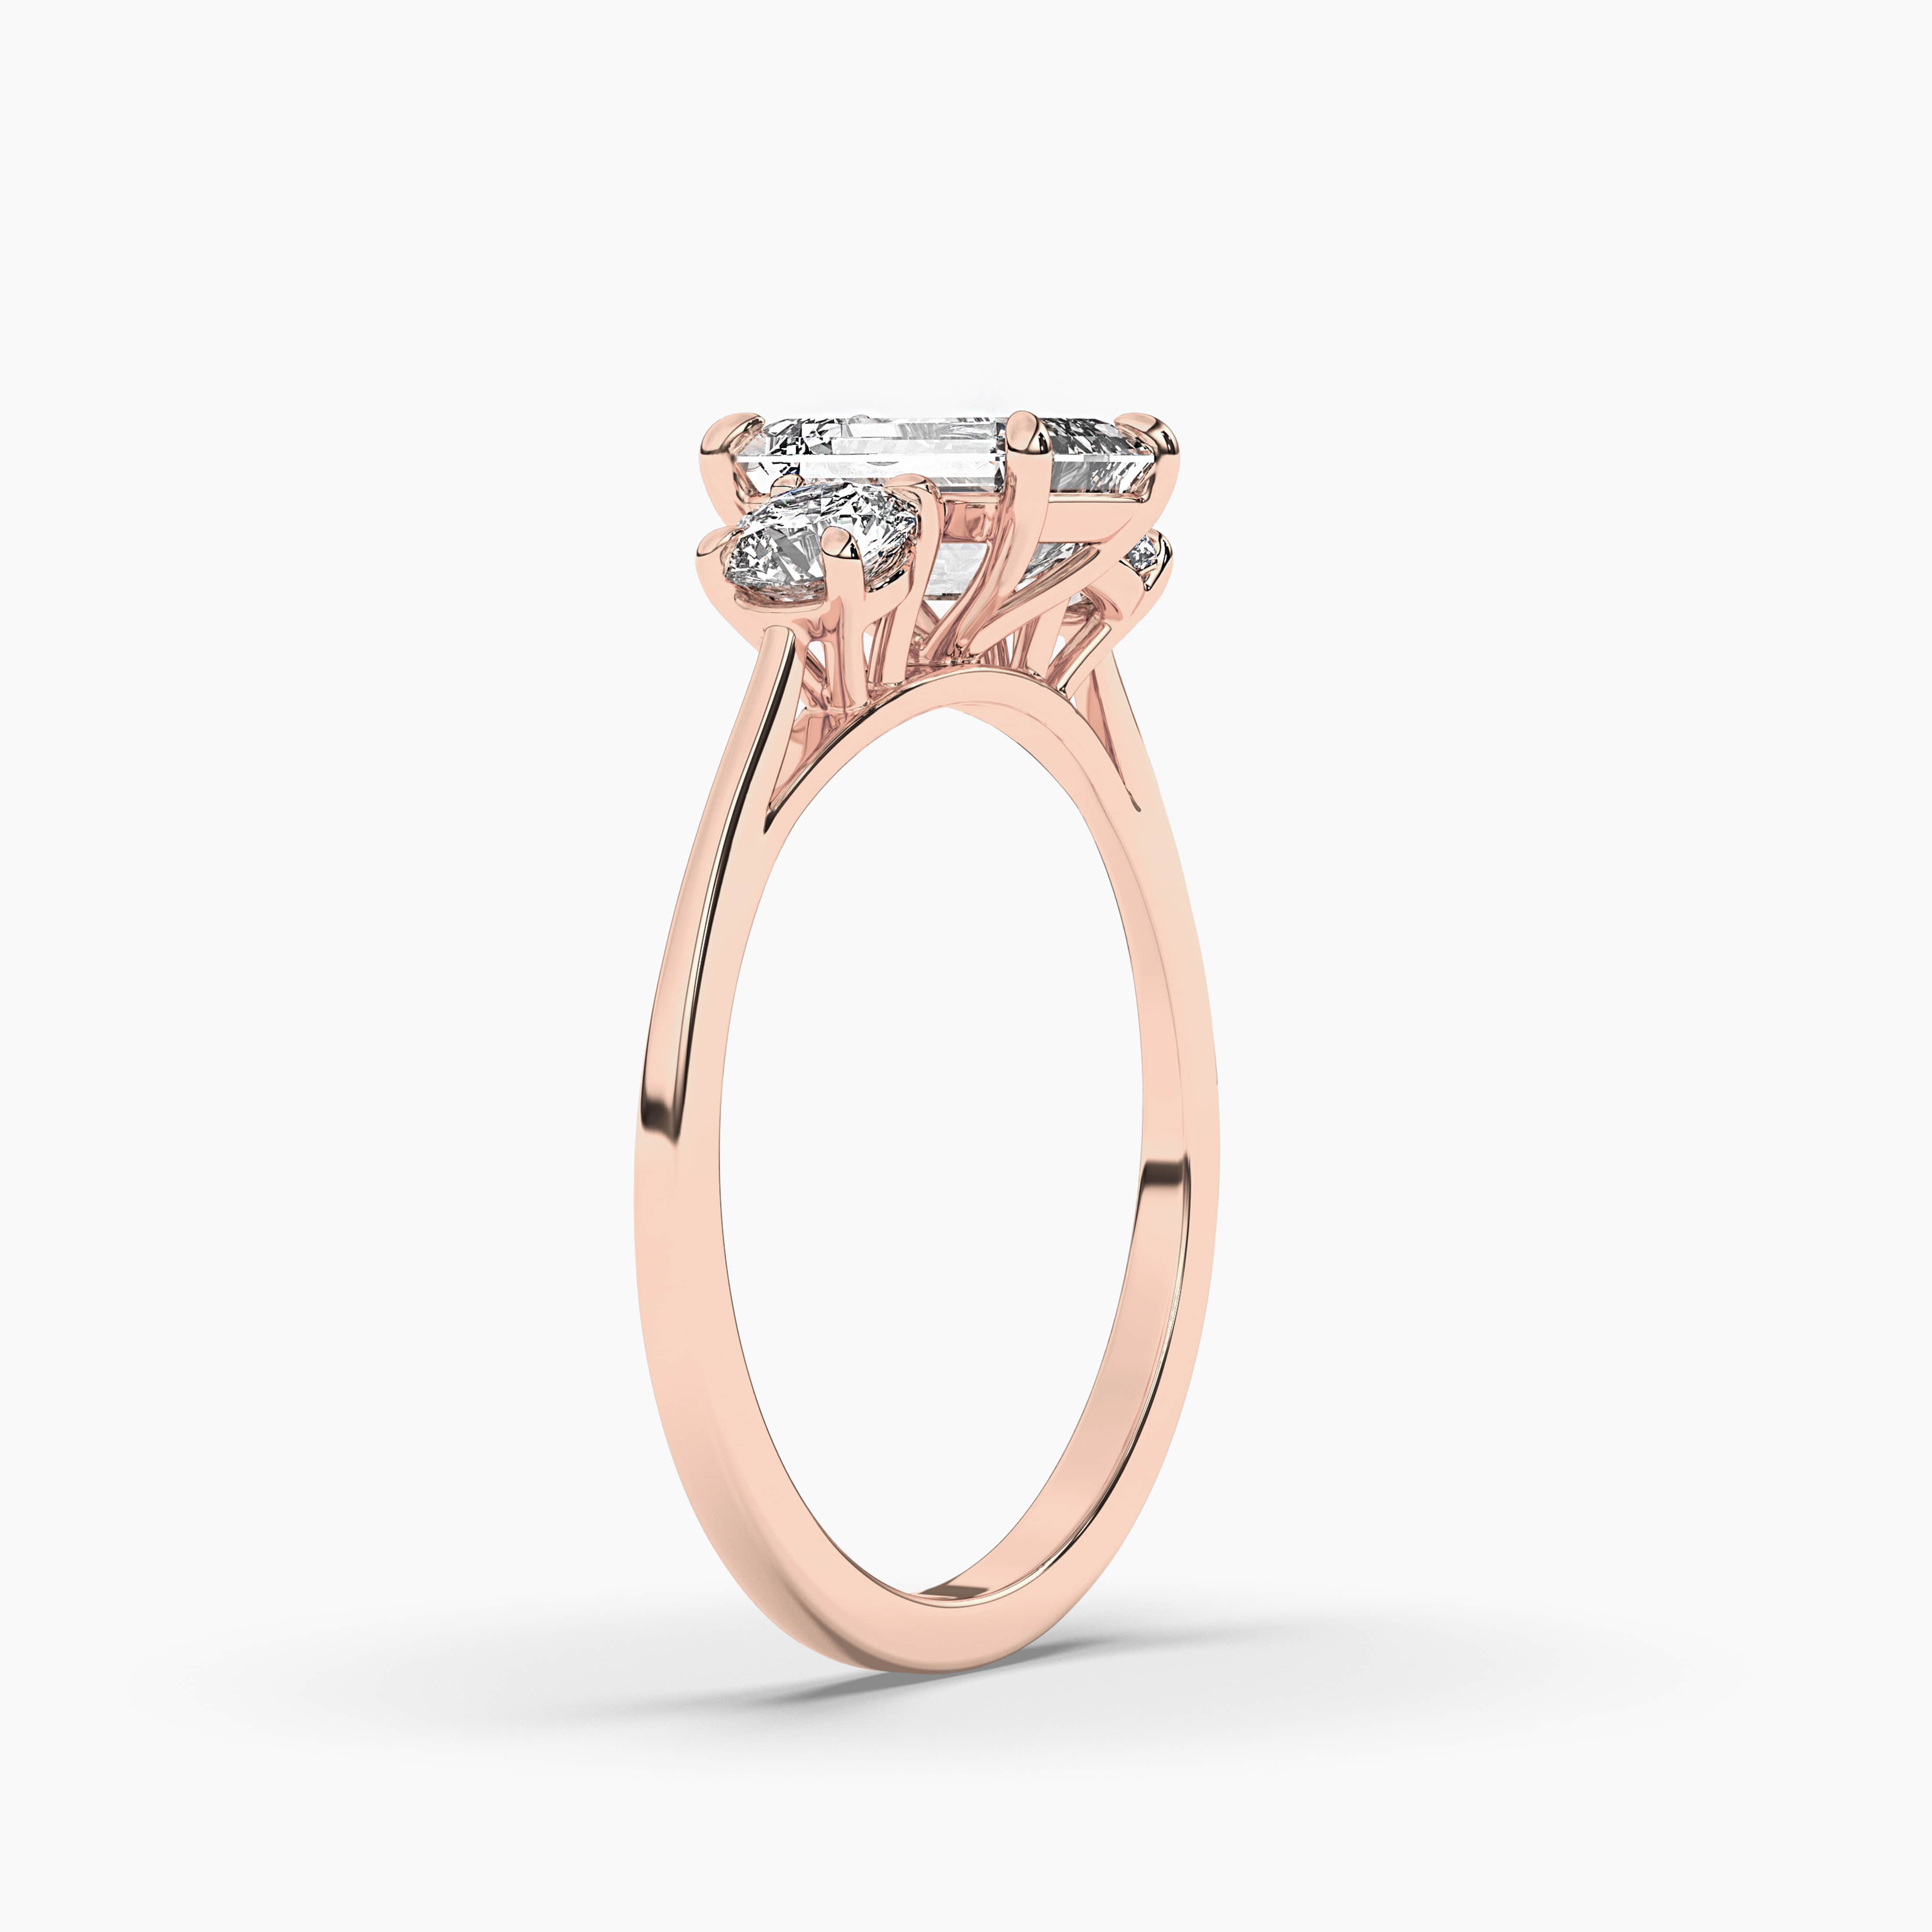 Emerald Engagement Ring Emerald Cut Ring Rose Gold